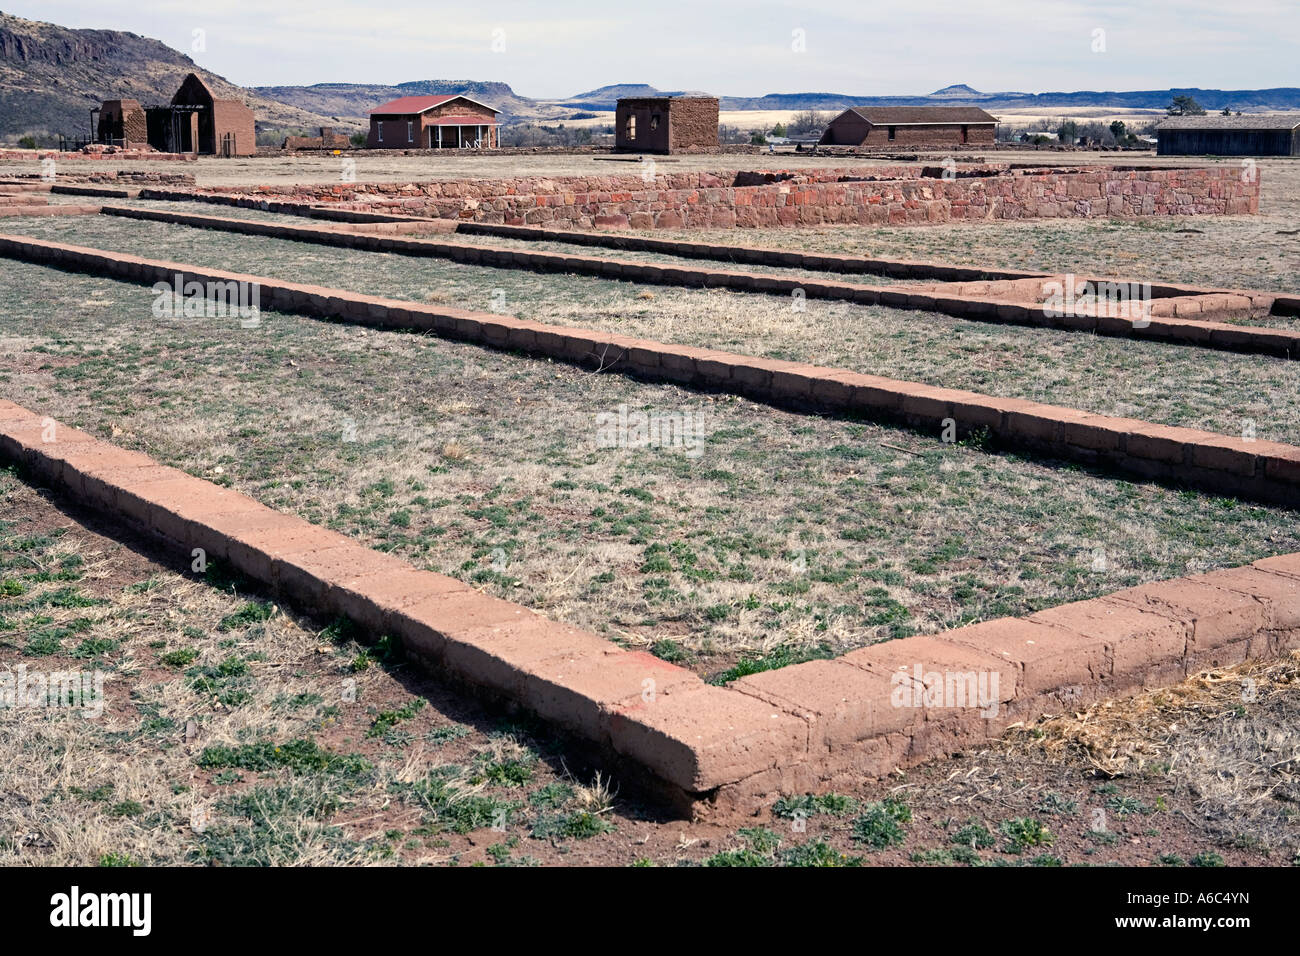 Fort Davis National Historic Site Texas is one of the best surviving examples of an Indian Wars frontier military post in the Southwest. Stock Photo